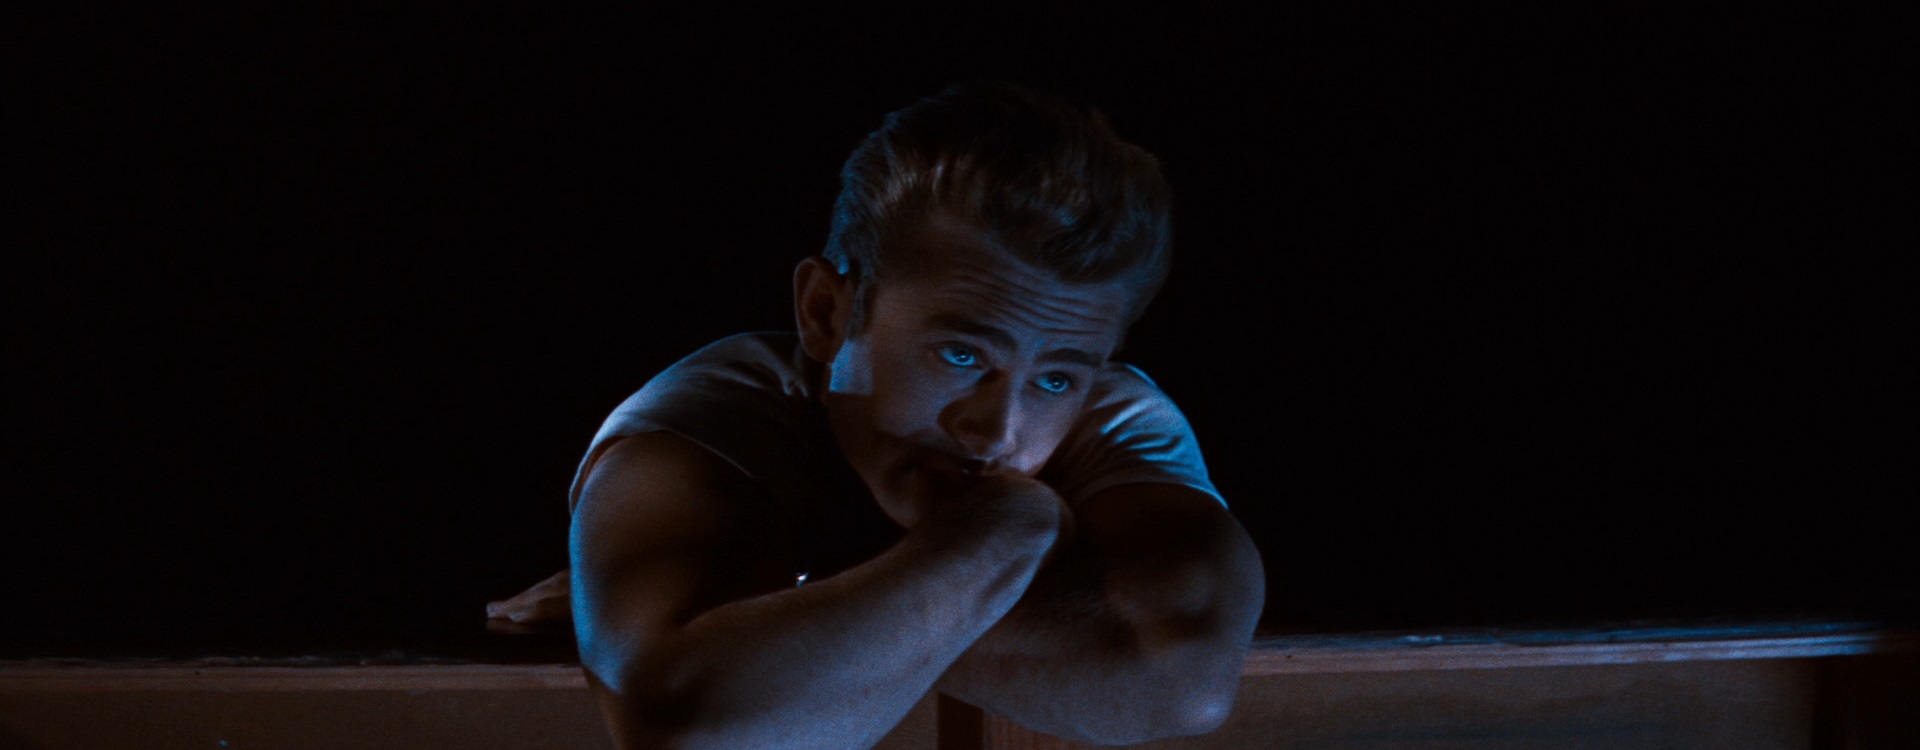 Videophiled: James Dean Ultimate Collector’s Edition